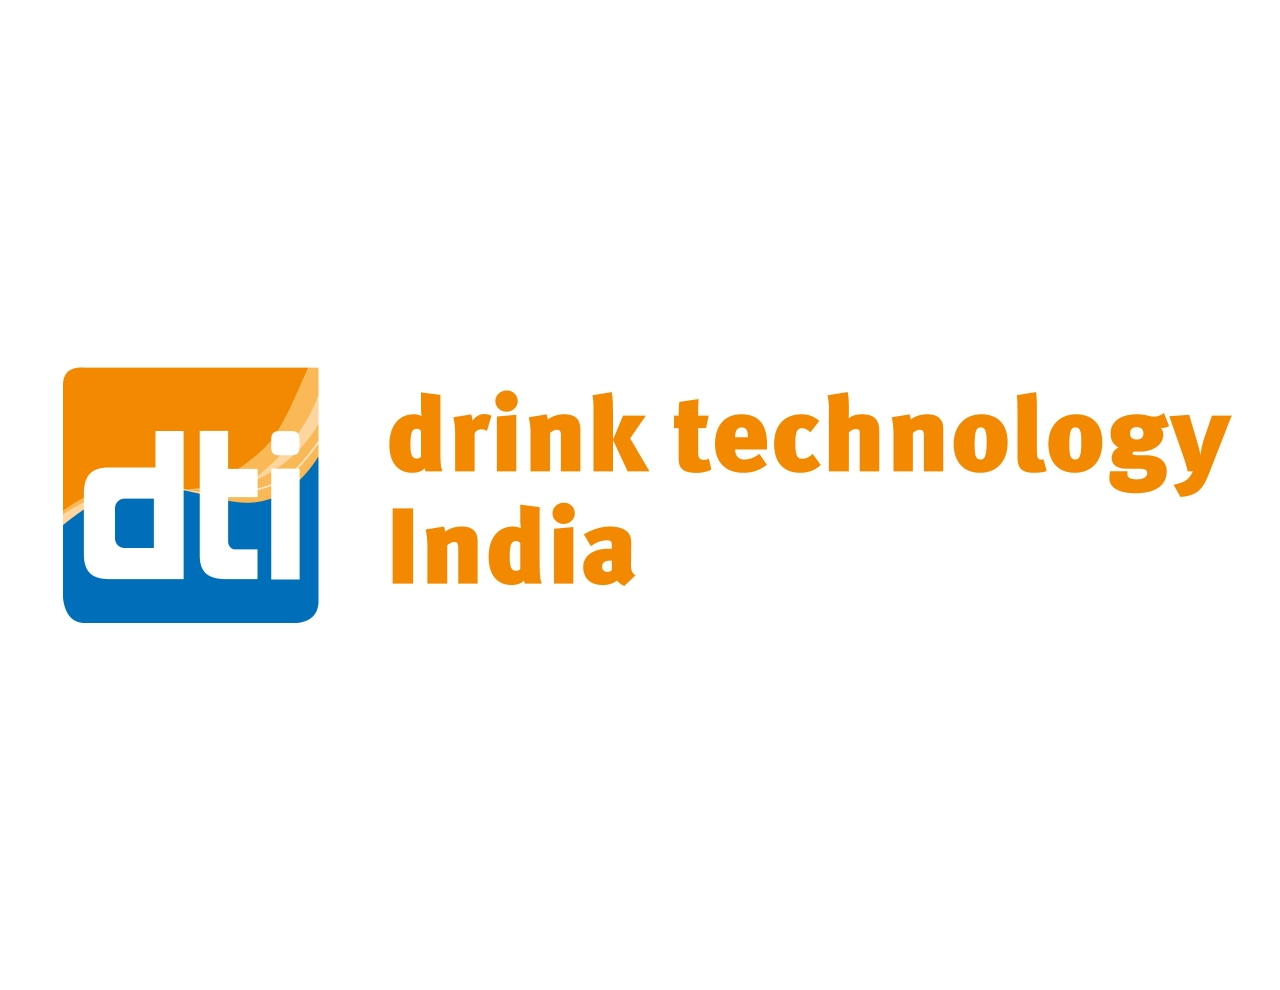 drink technology India now online